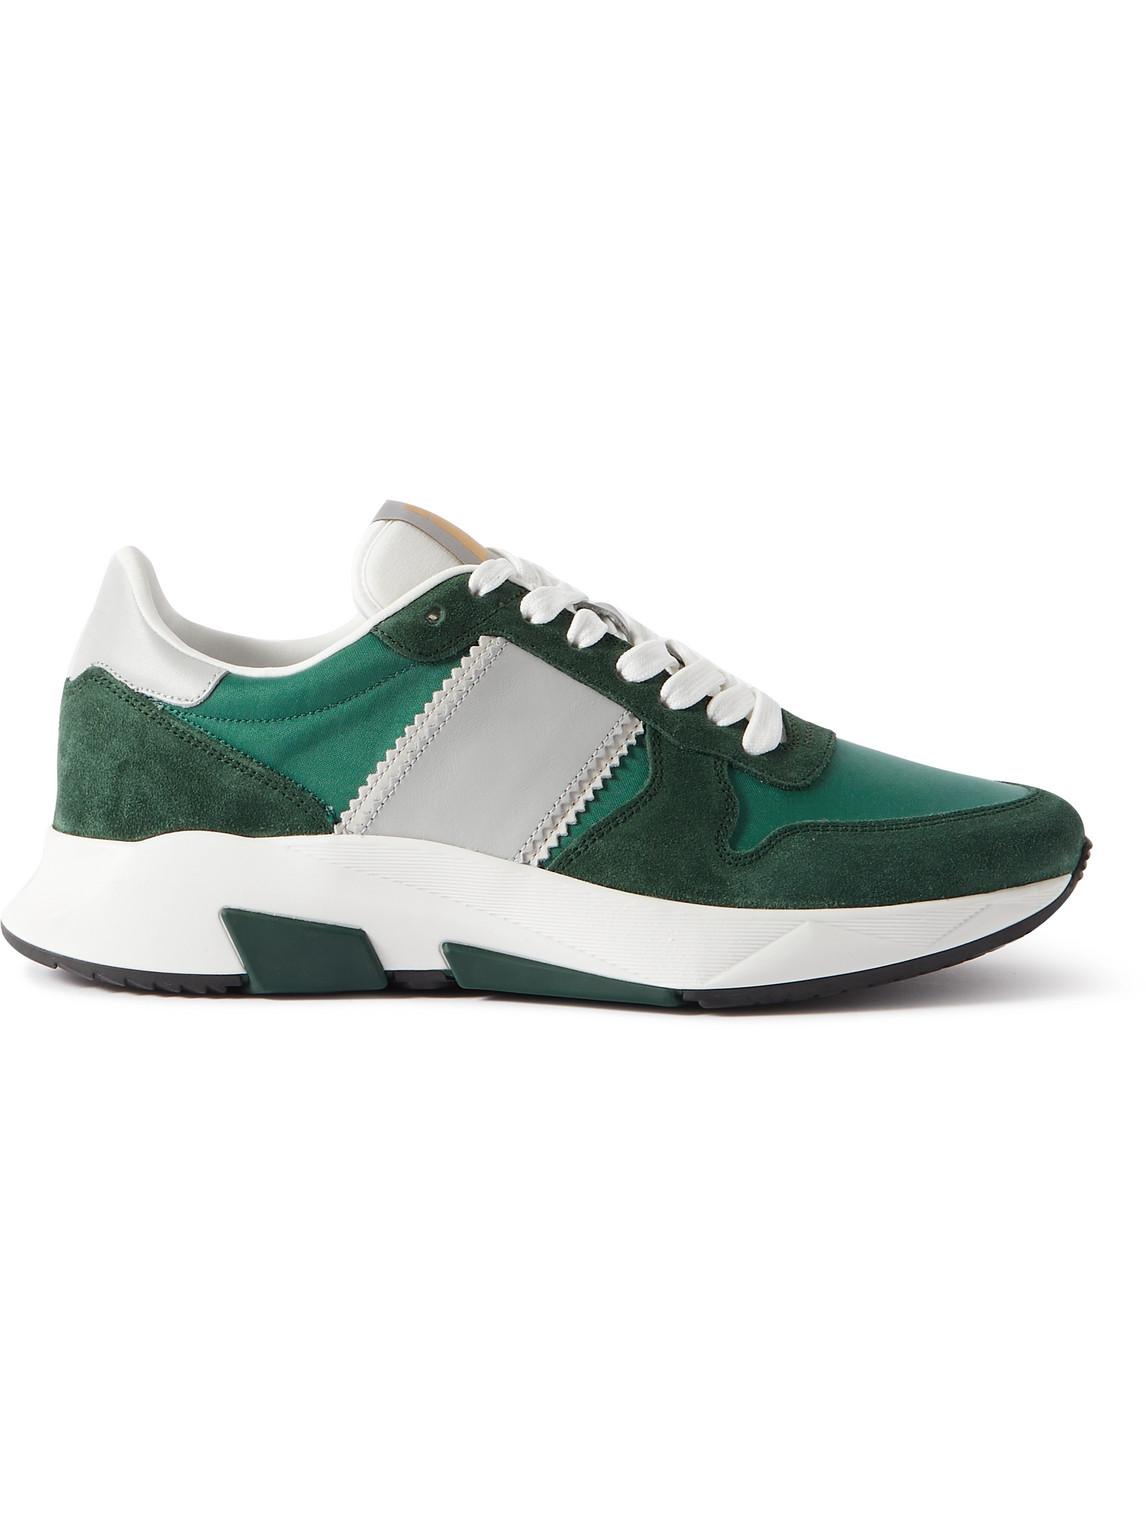 Tom Ford Jagga Leather-trimmed Nylon And Suede Sneakers in Green for Men |  Lyst